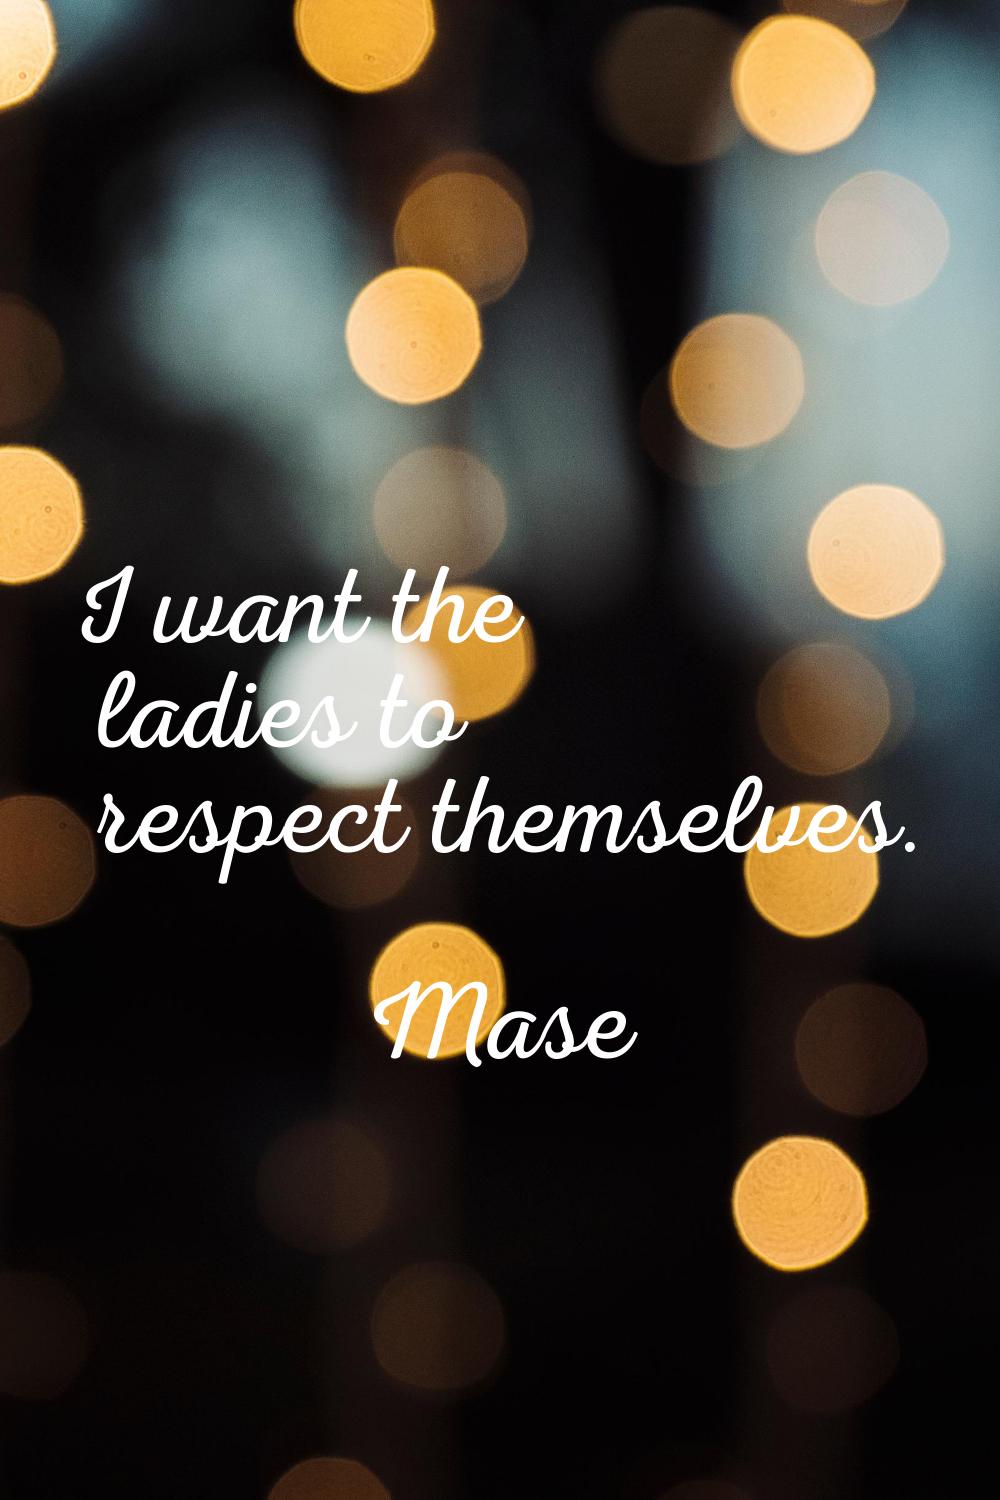 I want the ladies to respect themselves.